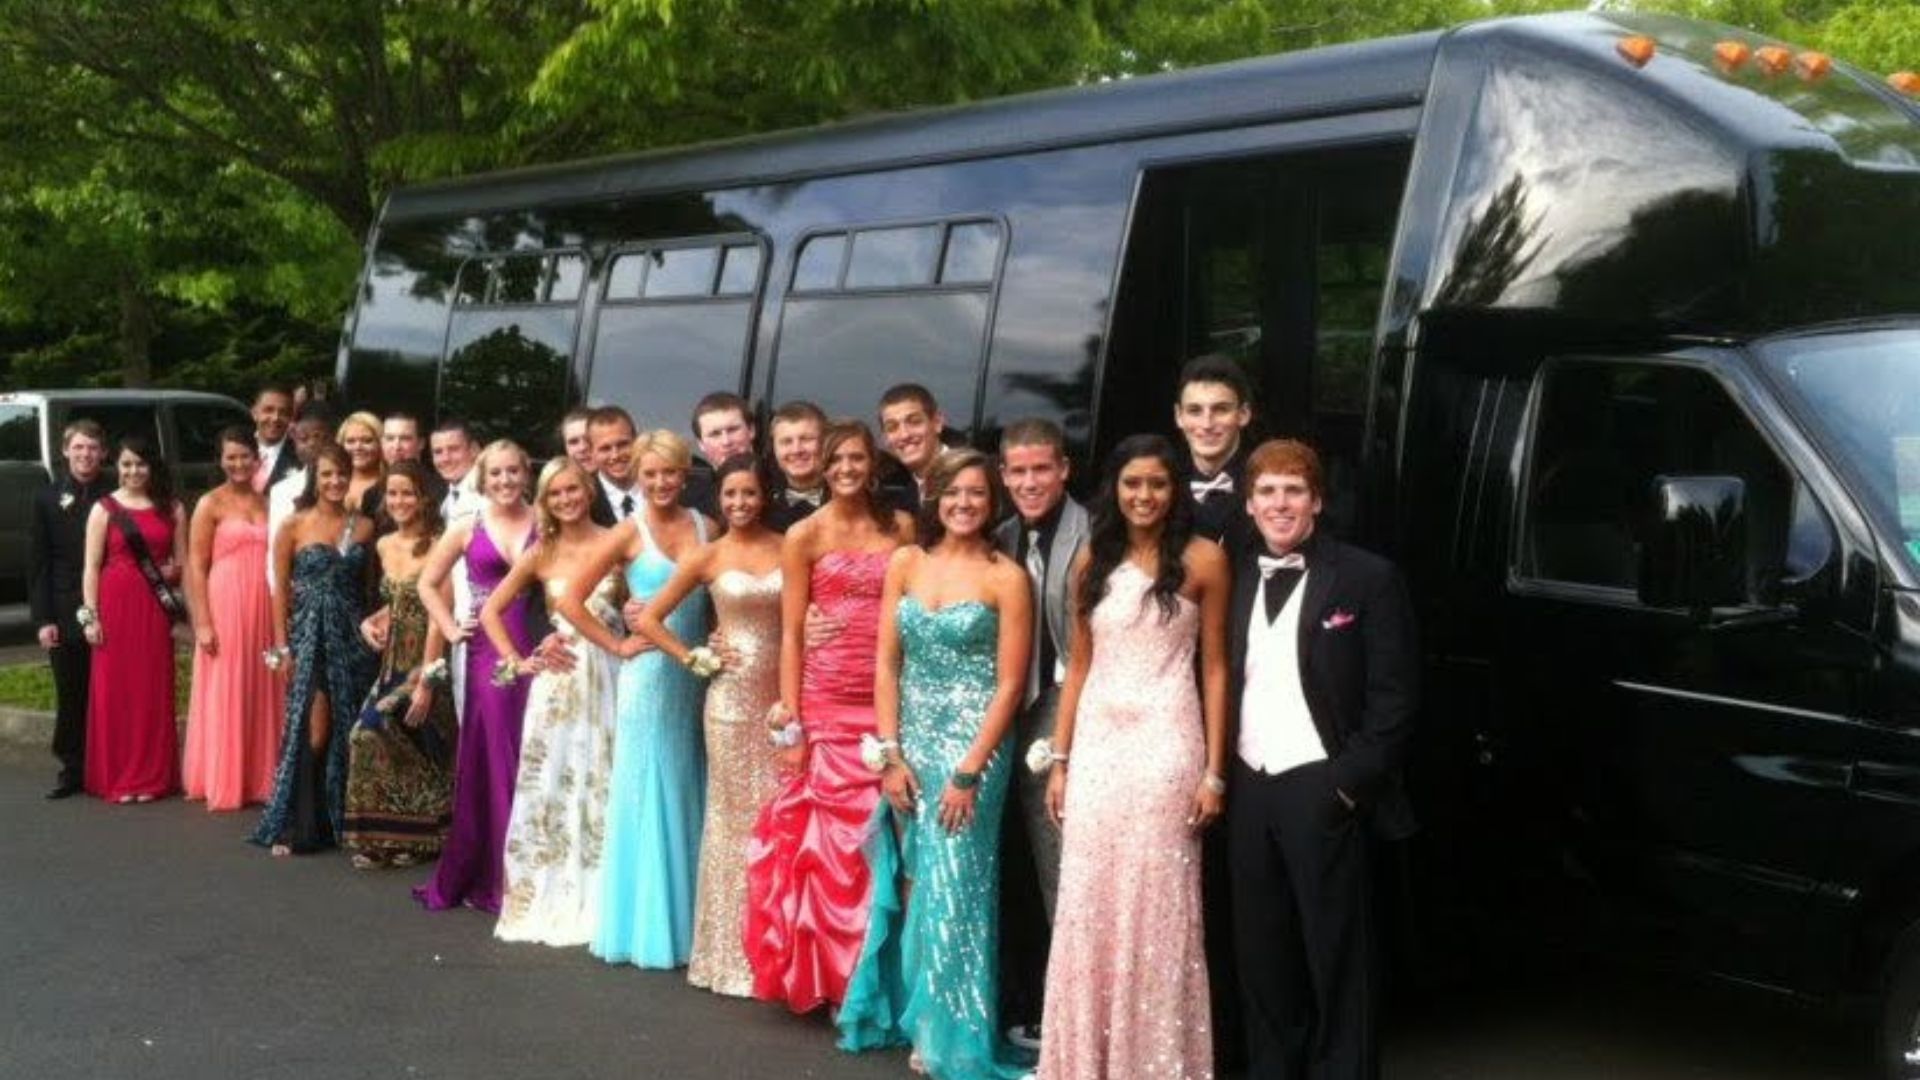 Group of prom goers stand in front of a party bus before board.